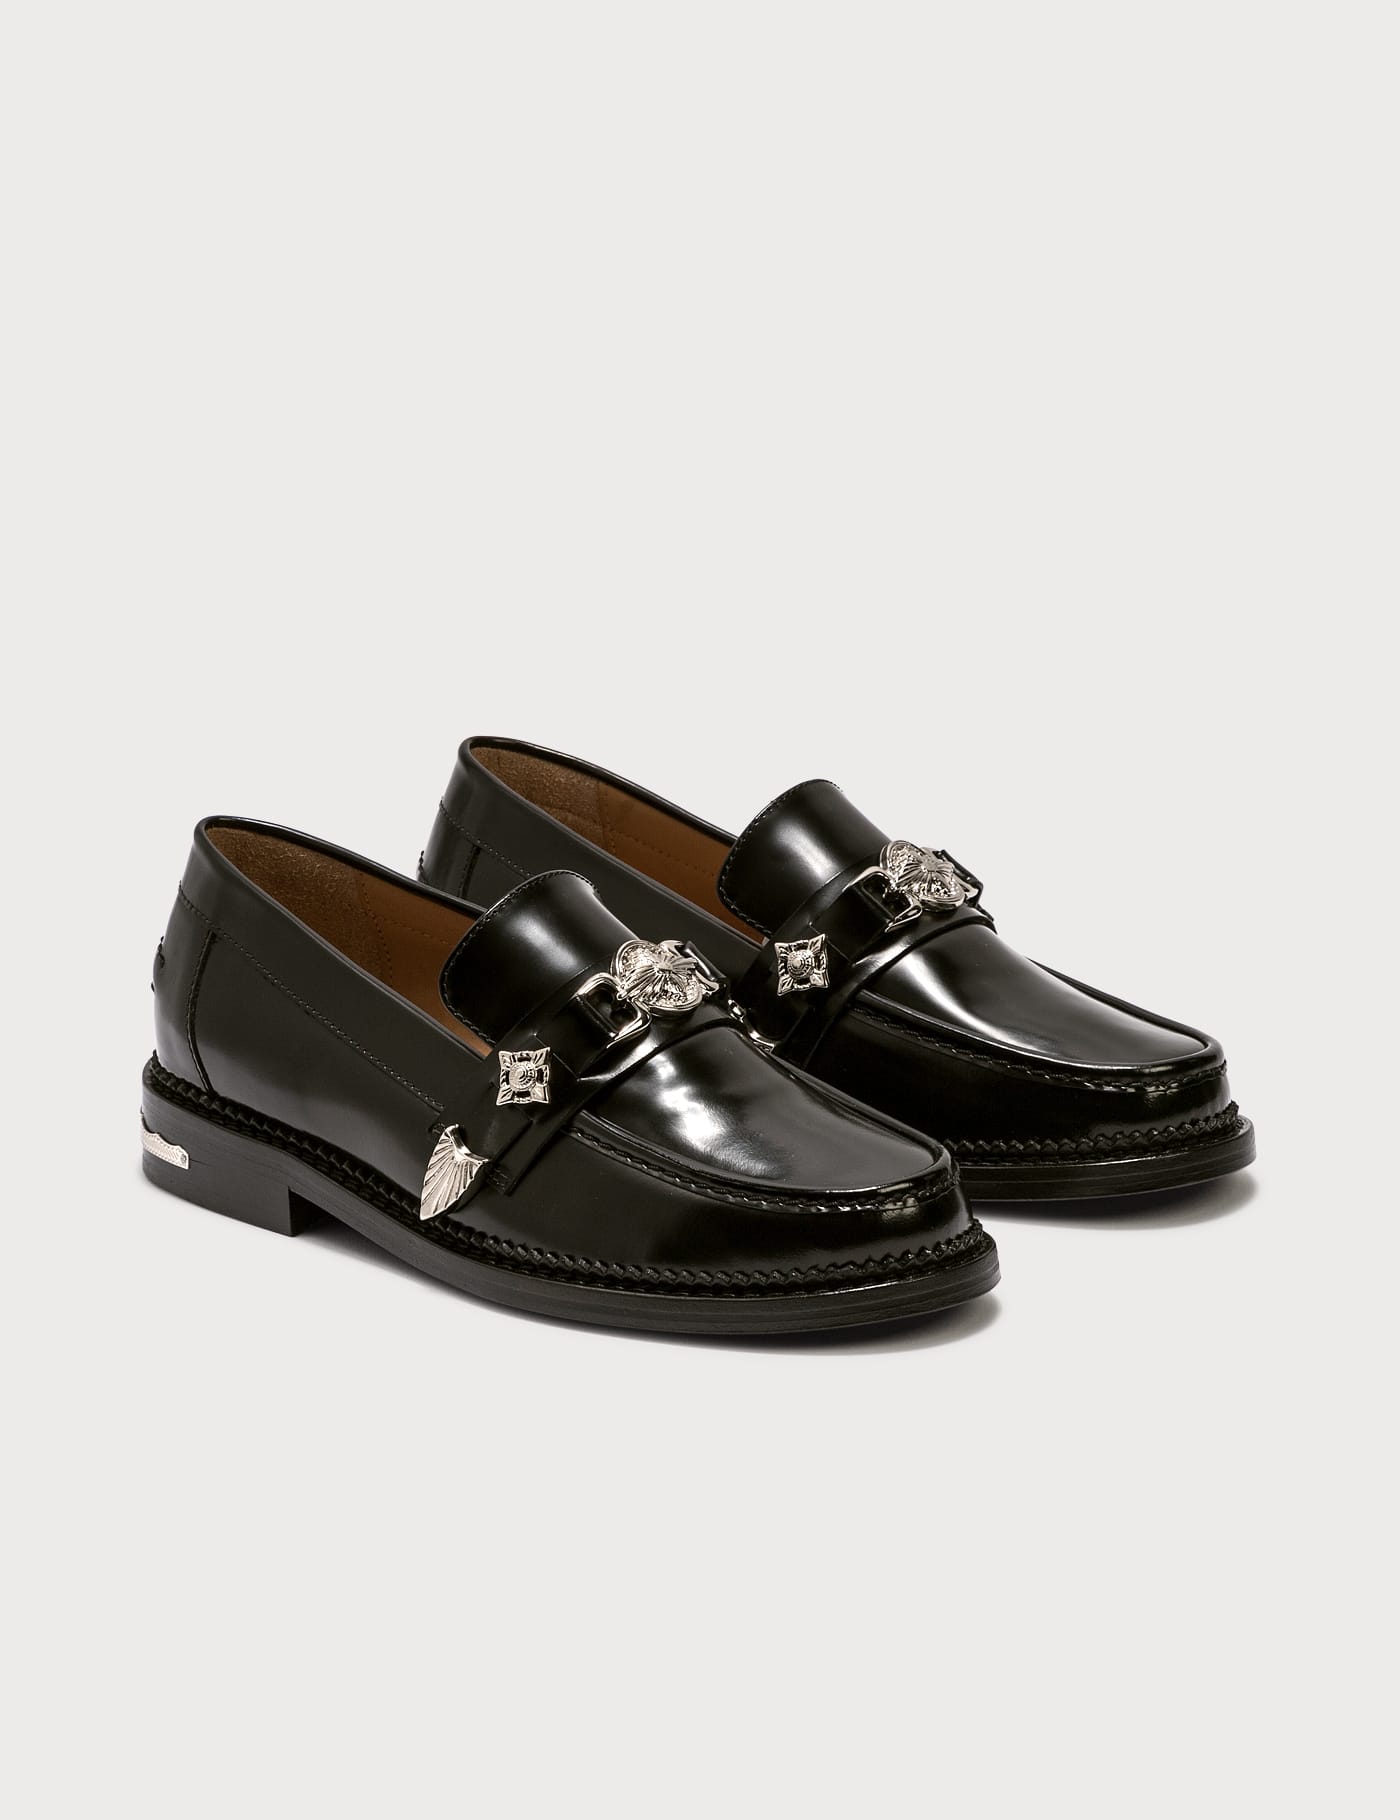 Toga Pulla - Loafer | HBX - Globally Curated Fashion and Lifestyle by  Hypebeast